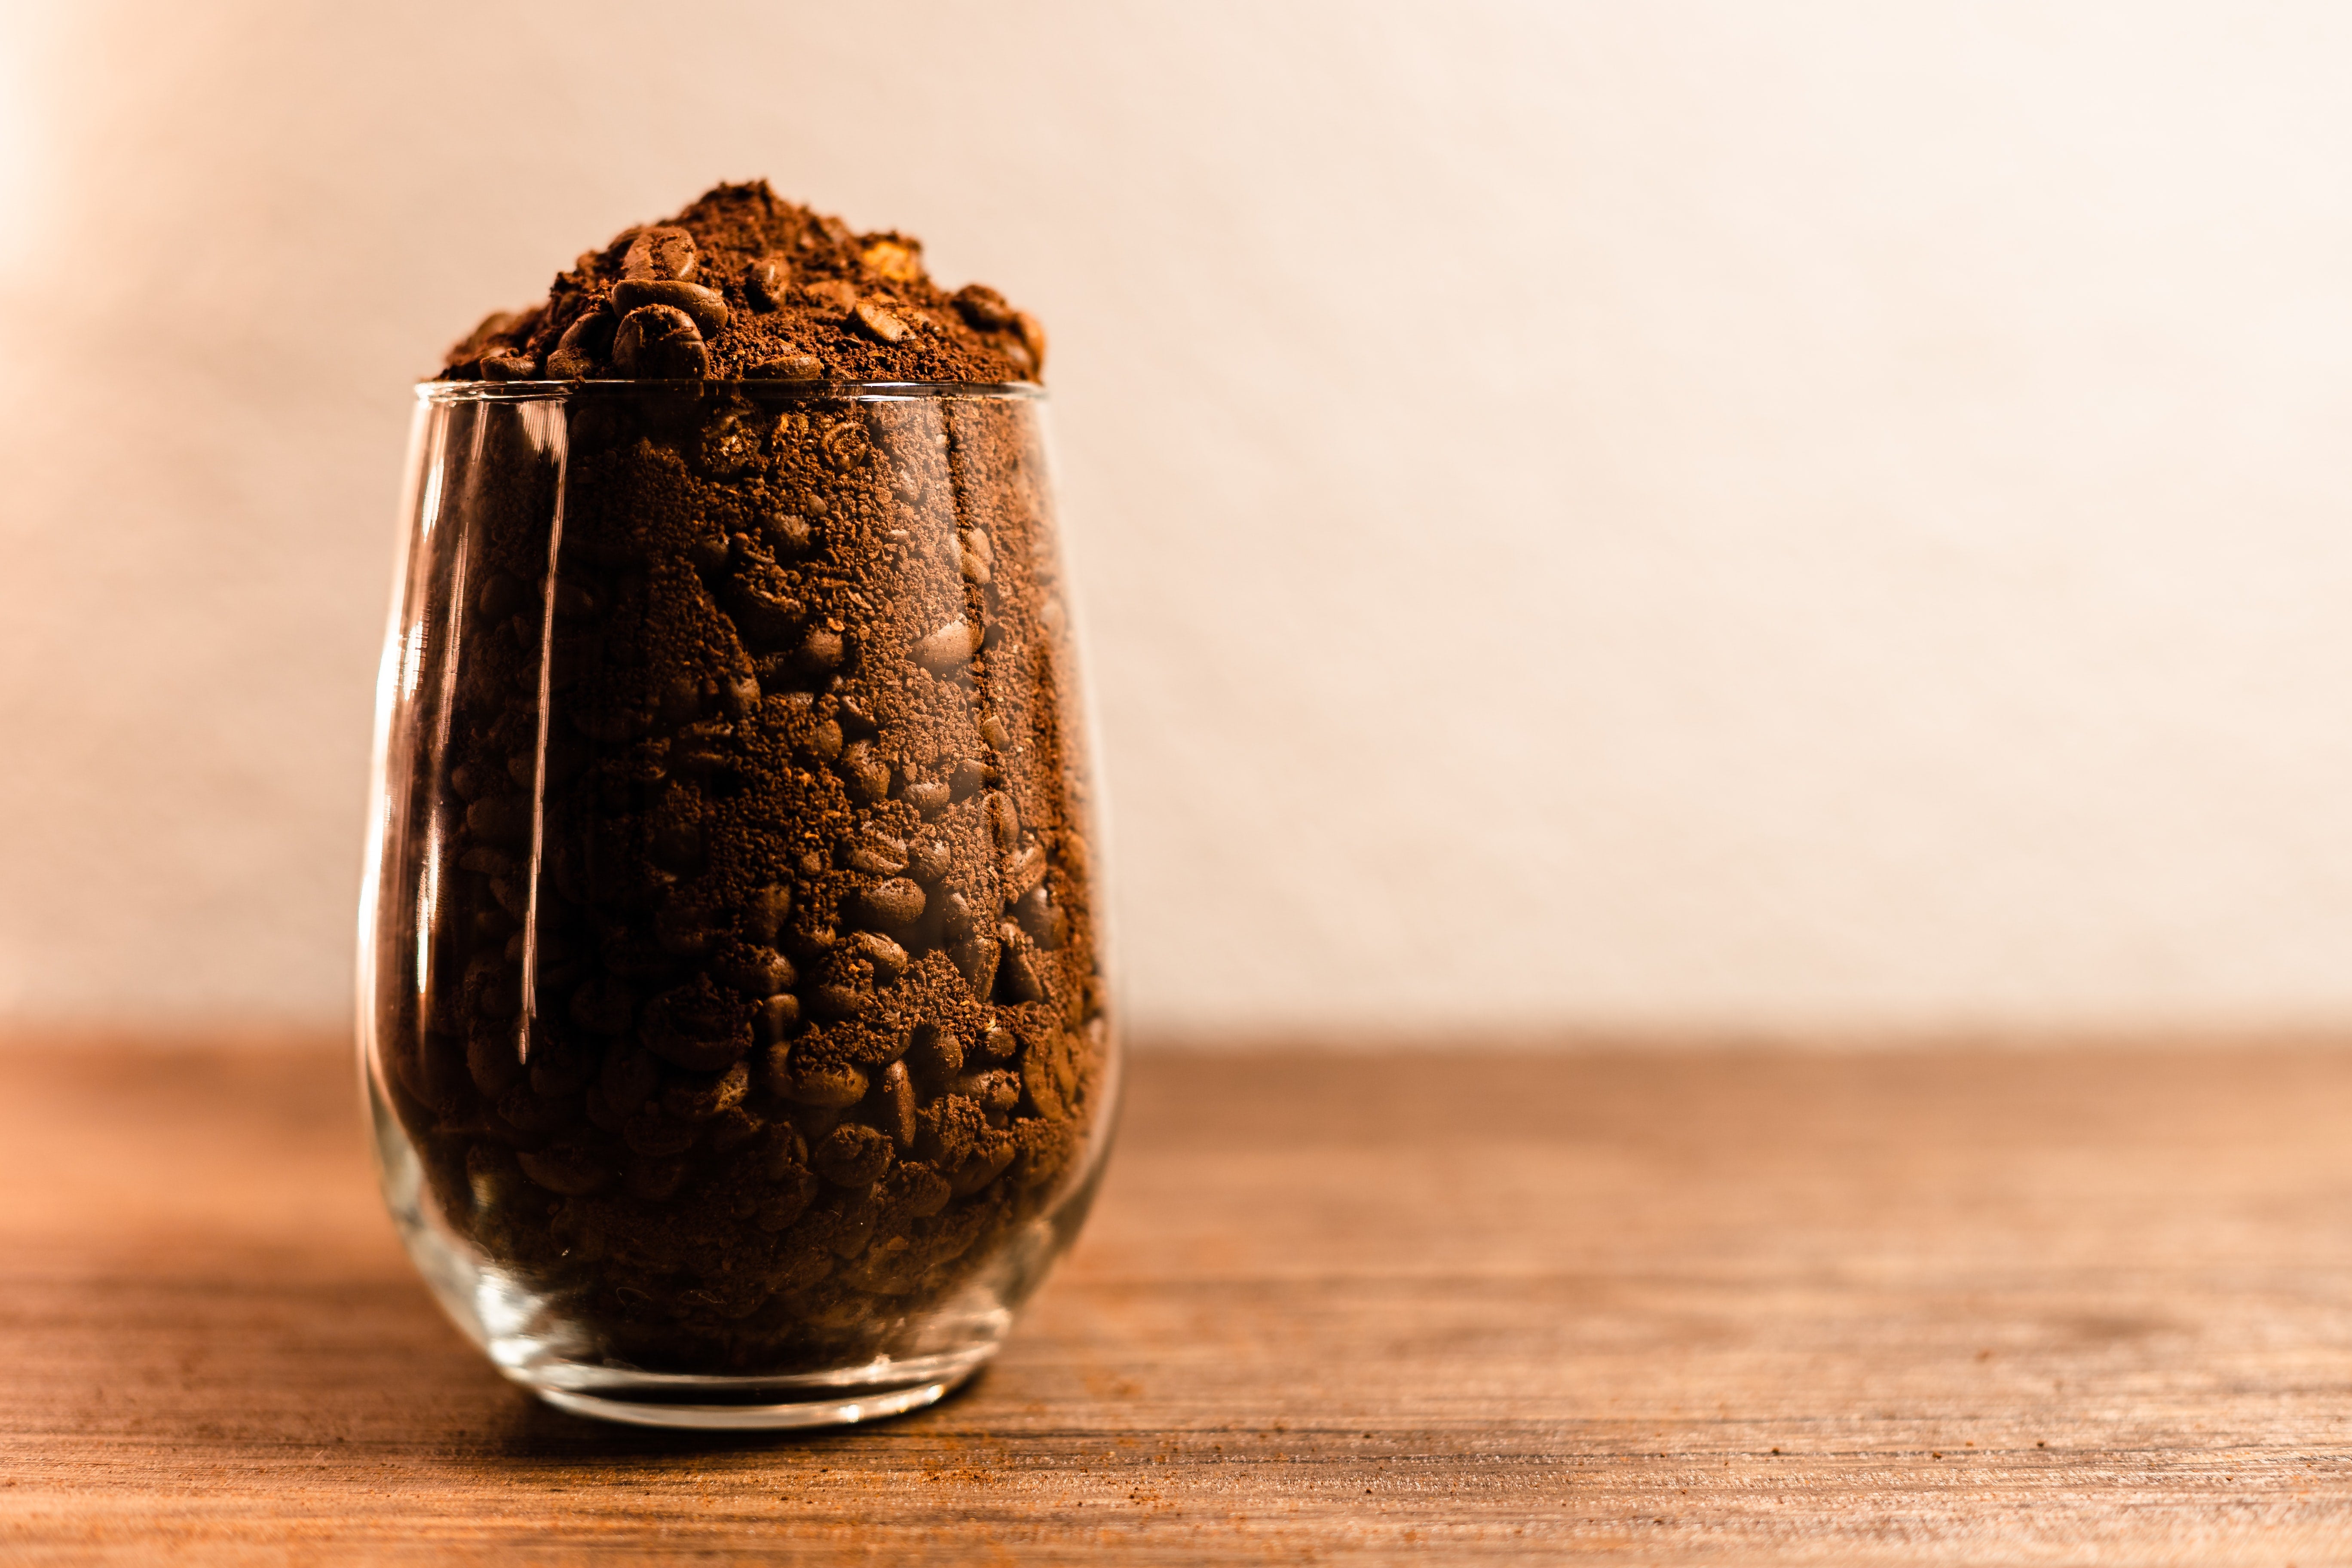 Coffee grounds in a glass